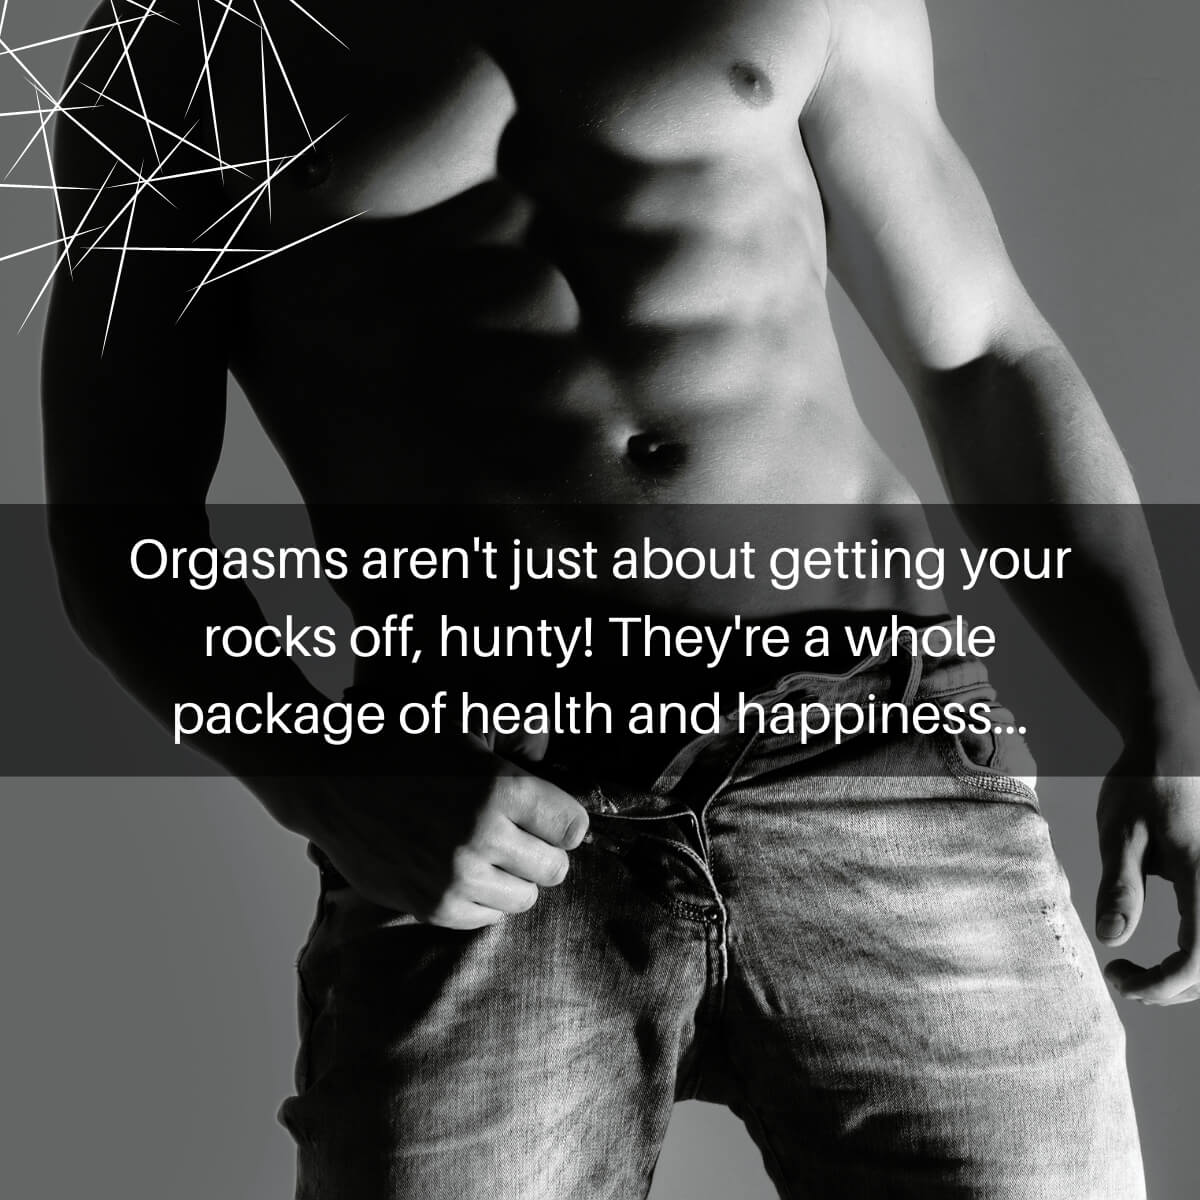 Orgasms are  a whole package of health and happiness